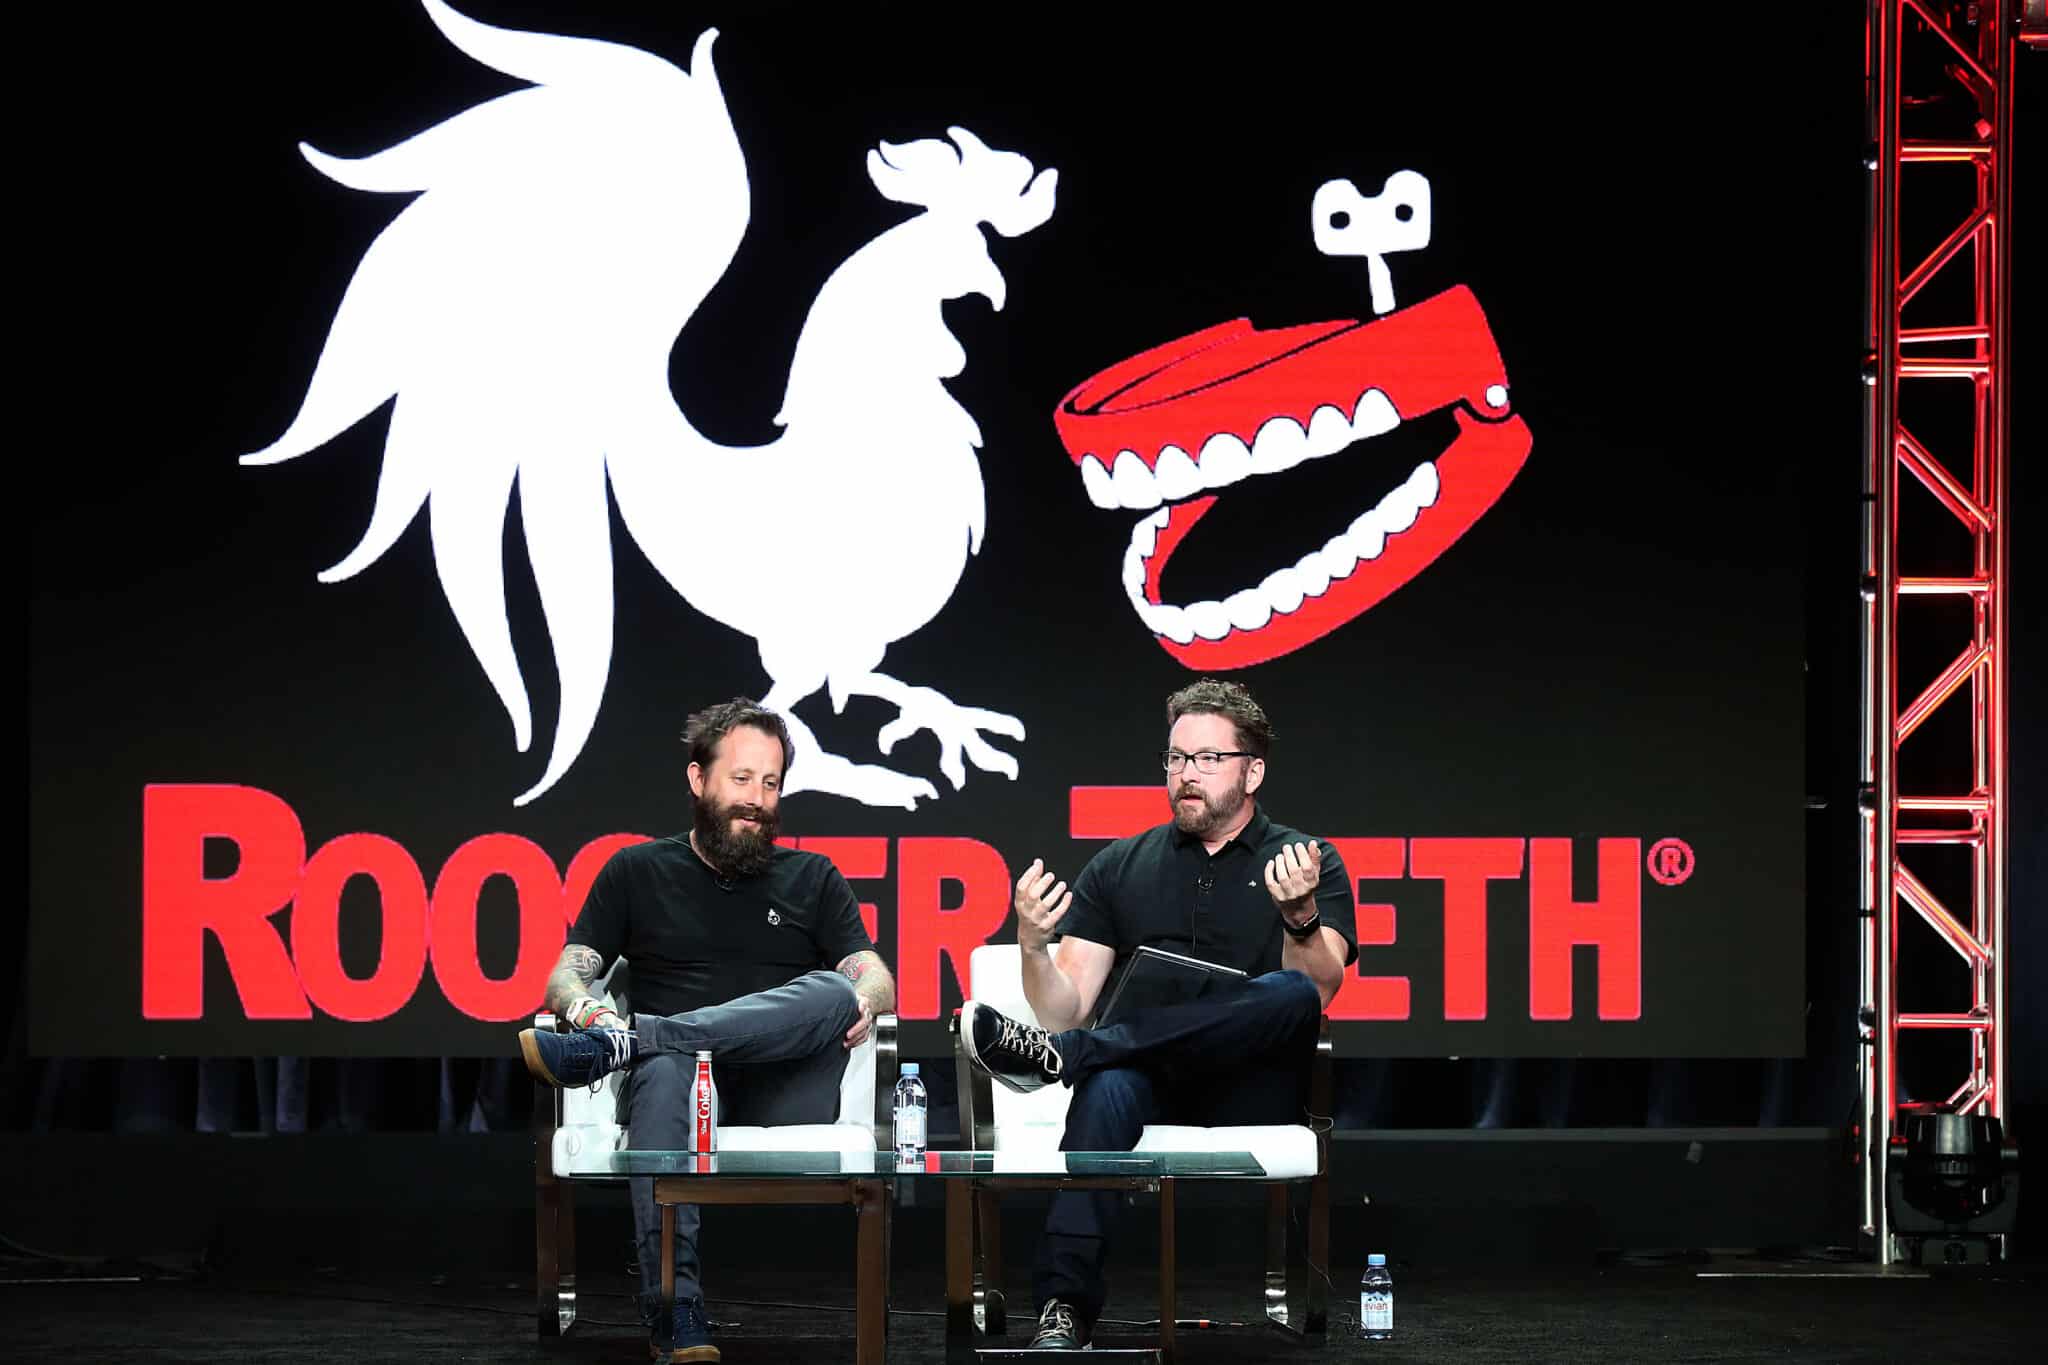 Geoff Ramsey and Burnie Burns of Rooster Teeth at a panel. 